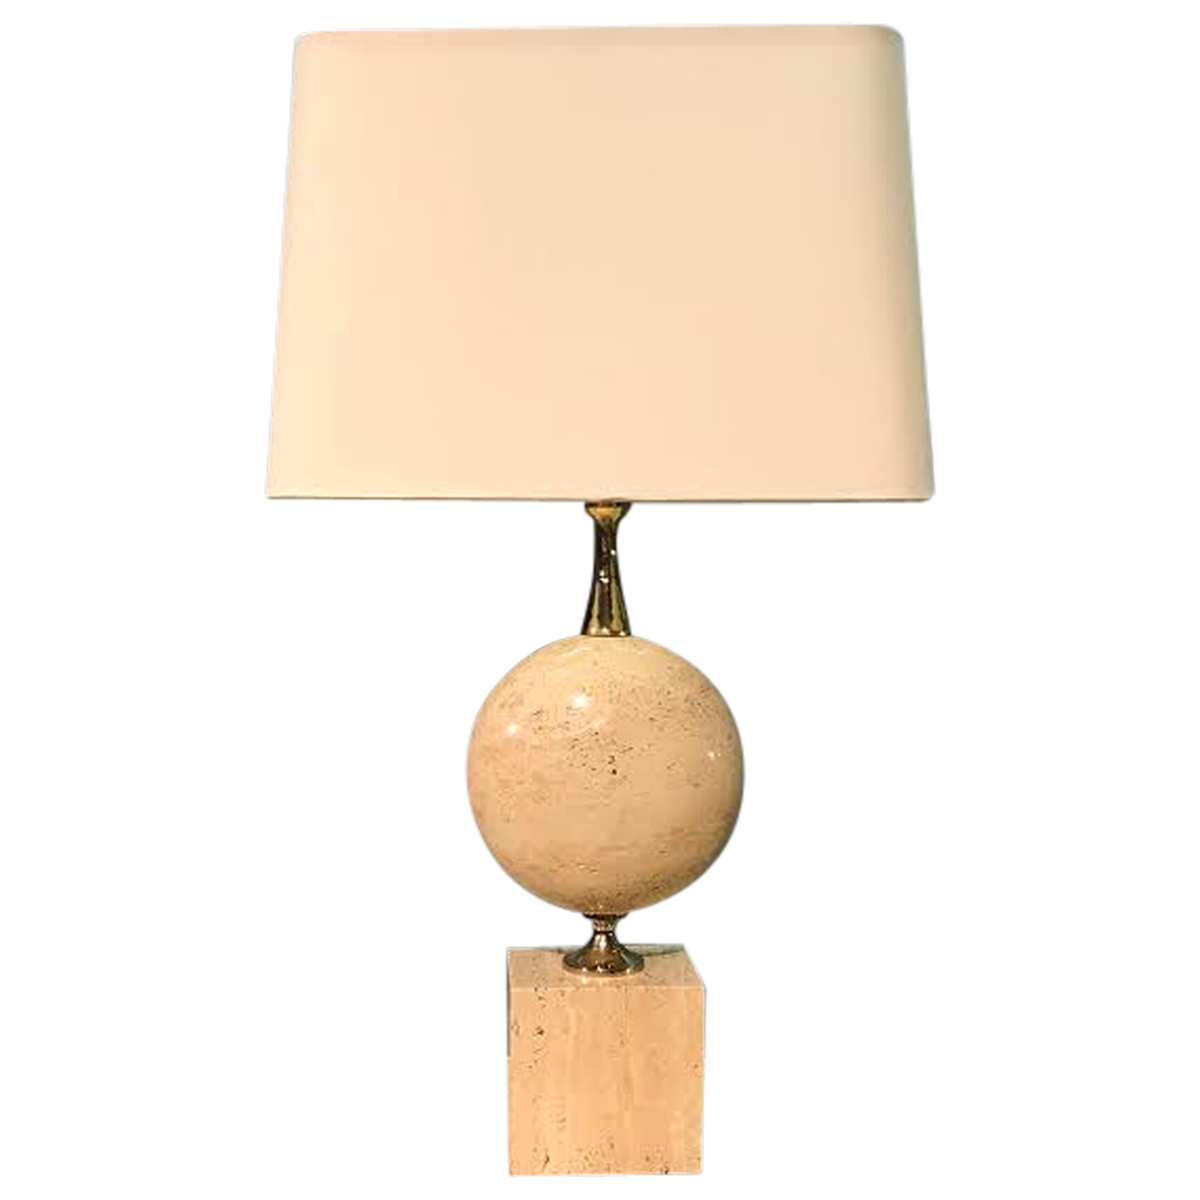 classical table lamp lighting accent spotlight west elm maison barbier furniture design farmhouse style small narrow dining cover cloth dimmable large marble coffee solid wood